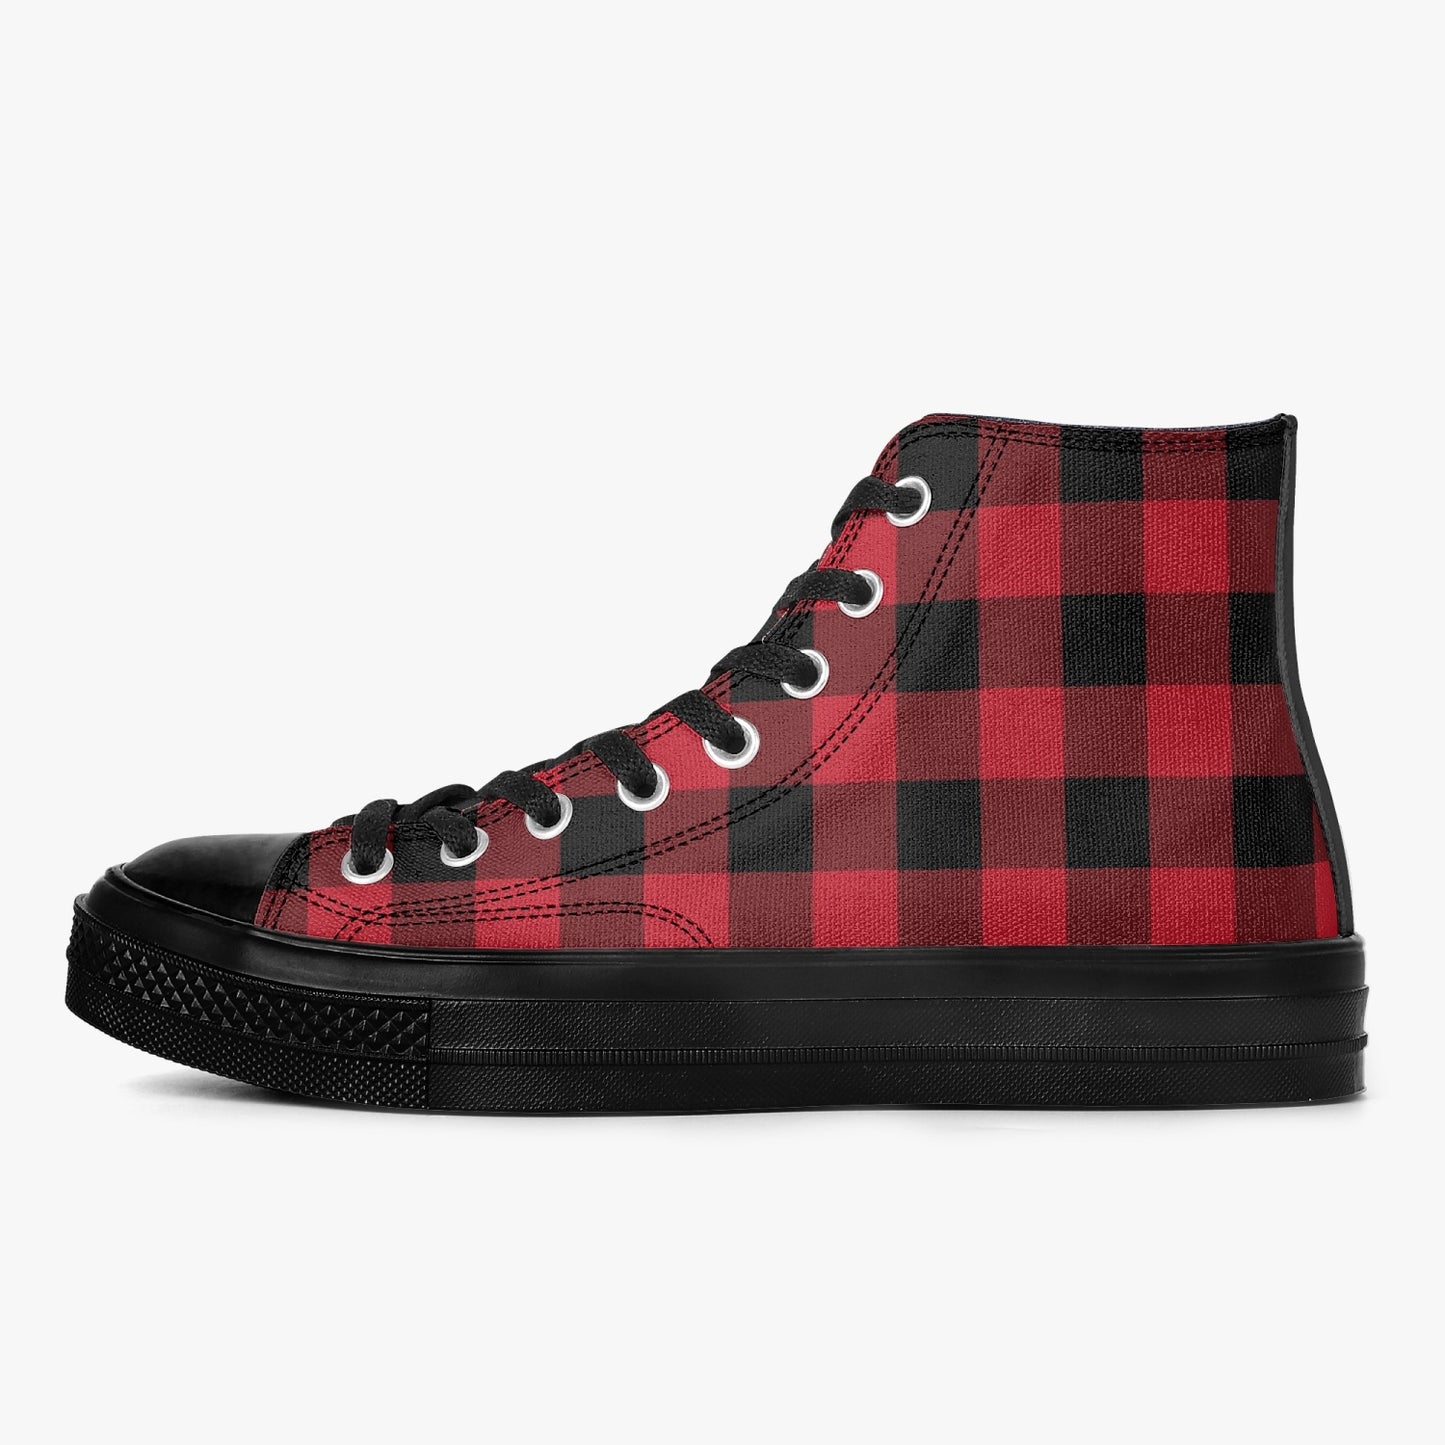 Red Buffalo Plaid High Top Shoes, Black Check Lace Up Sneakers Footwear Rave Canvas Streetwear Designer Men Women Gift Starcove Fashion